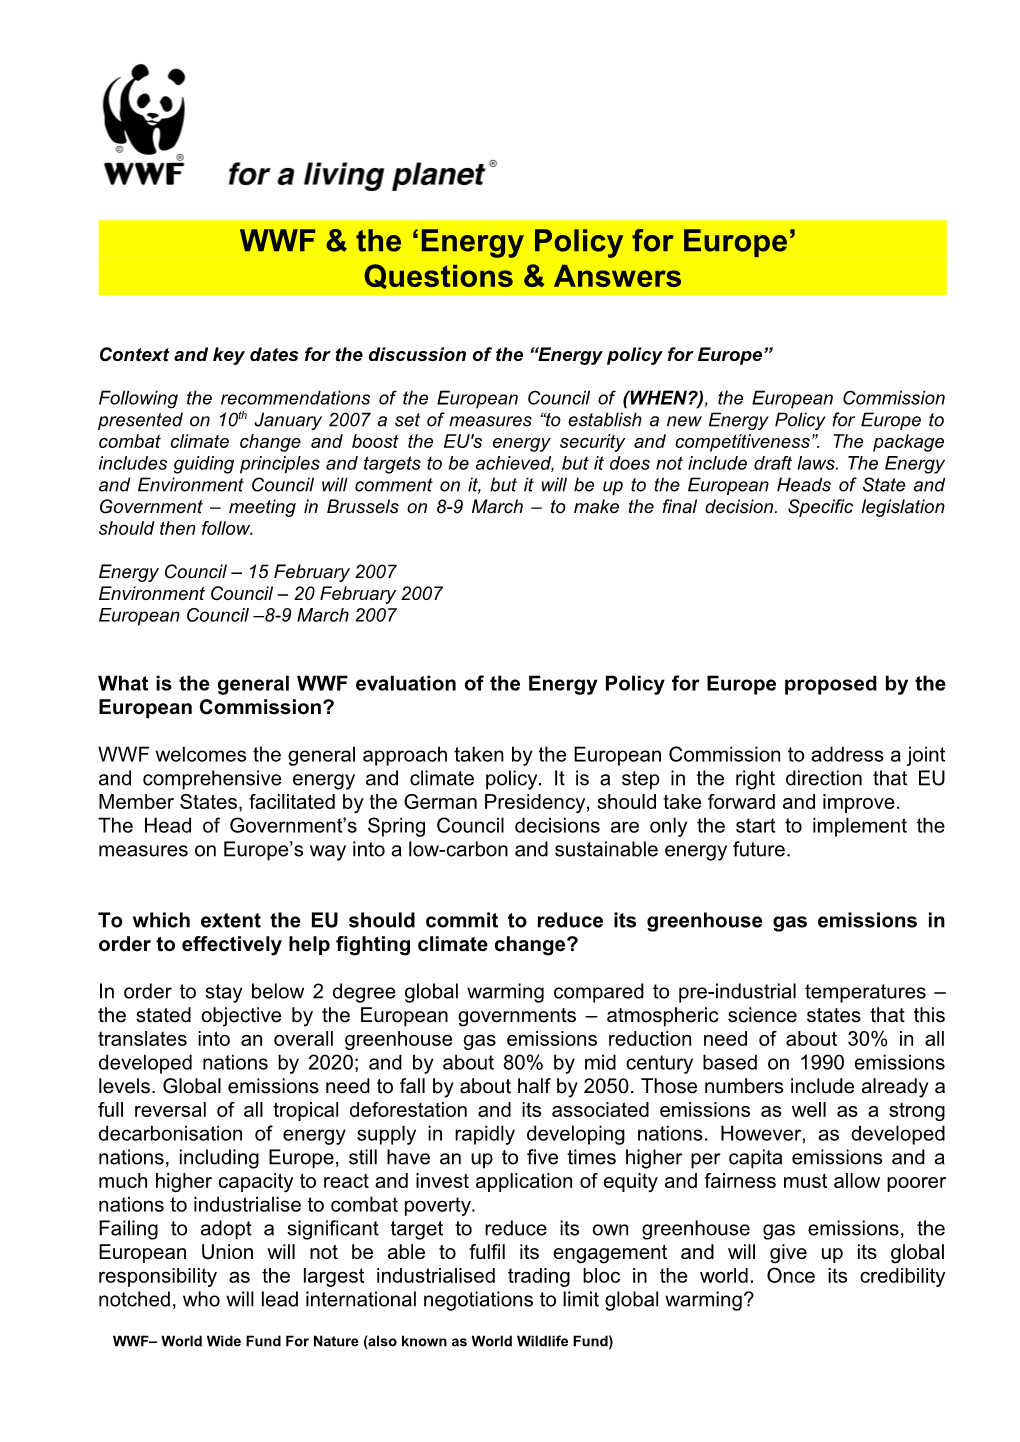 WWF & the Energy Policy for Europe